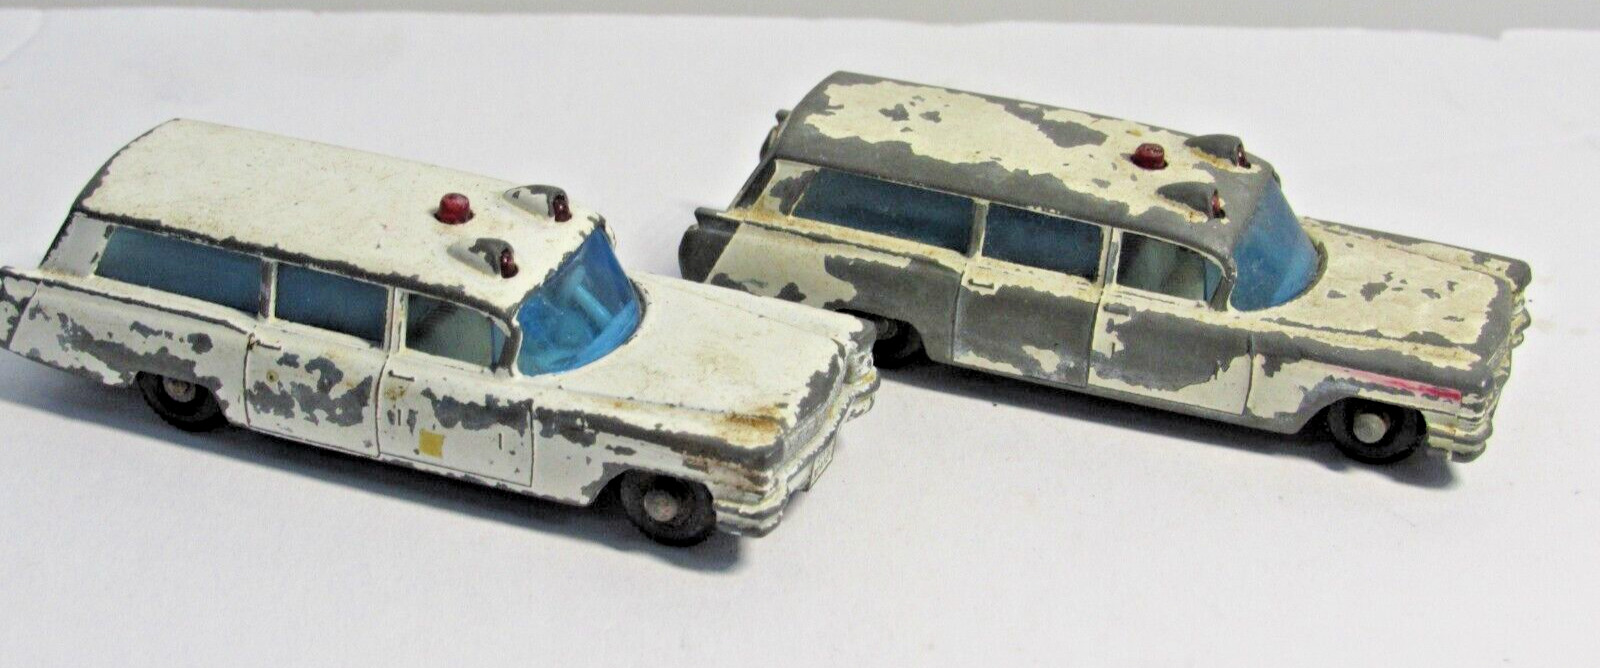 2 Matchbox S & S Cadillac Ambulance No. 54 By Lesney  GHOSTBUSTERS C3-27